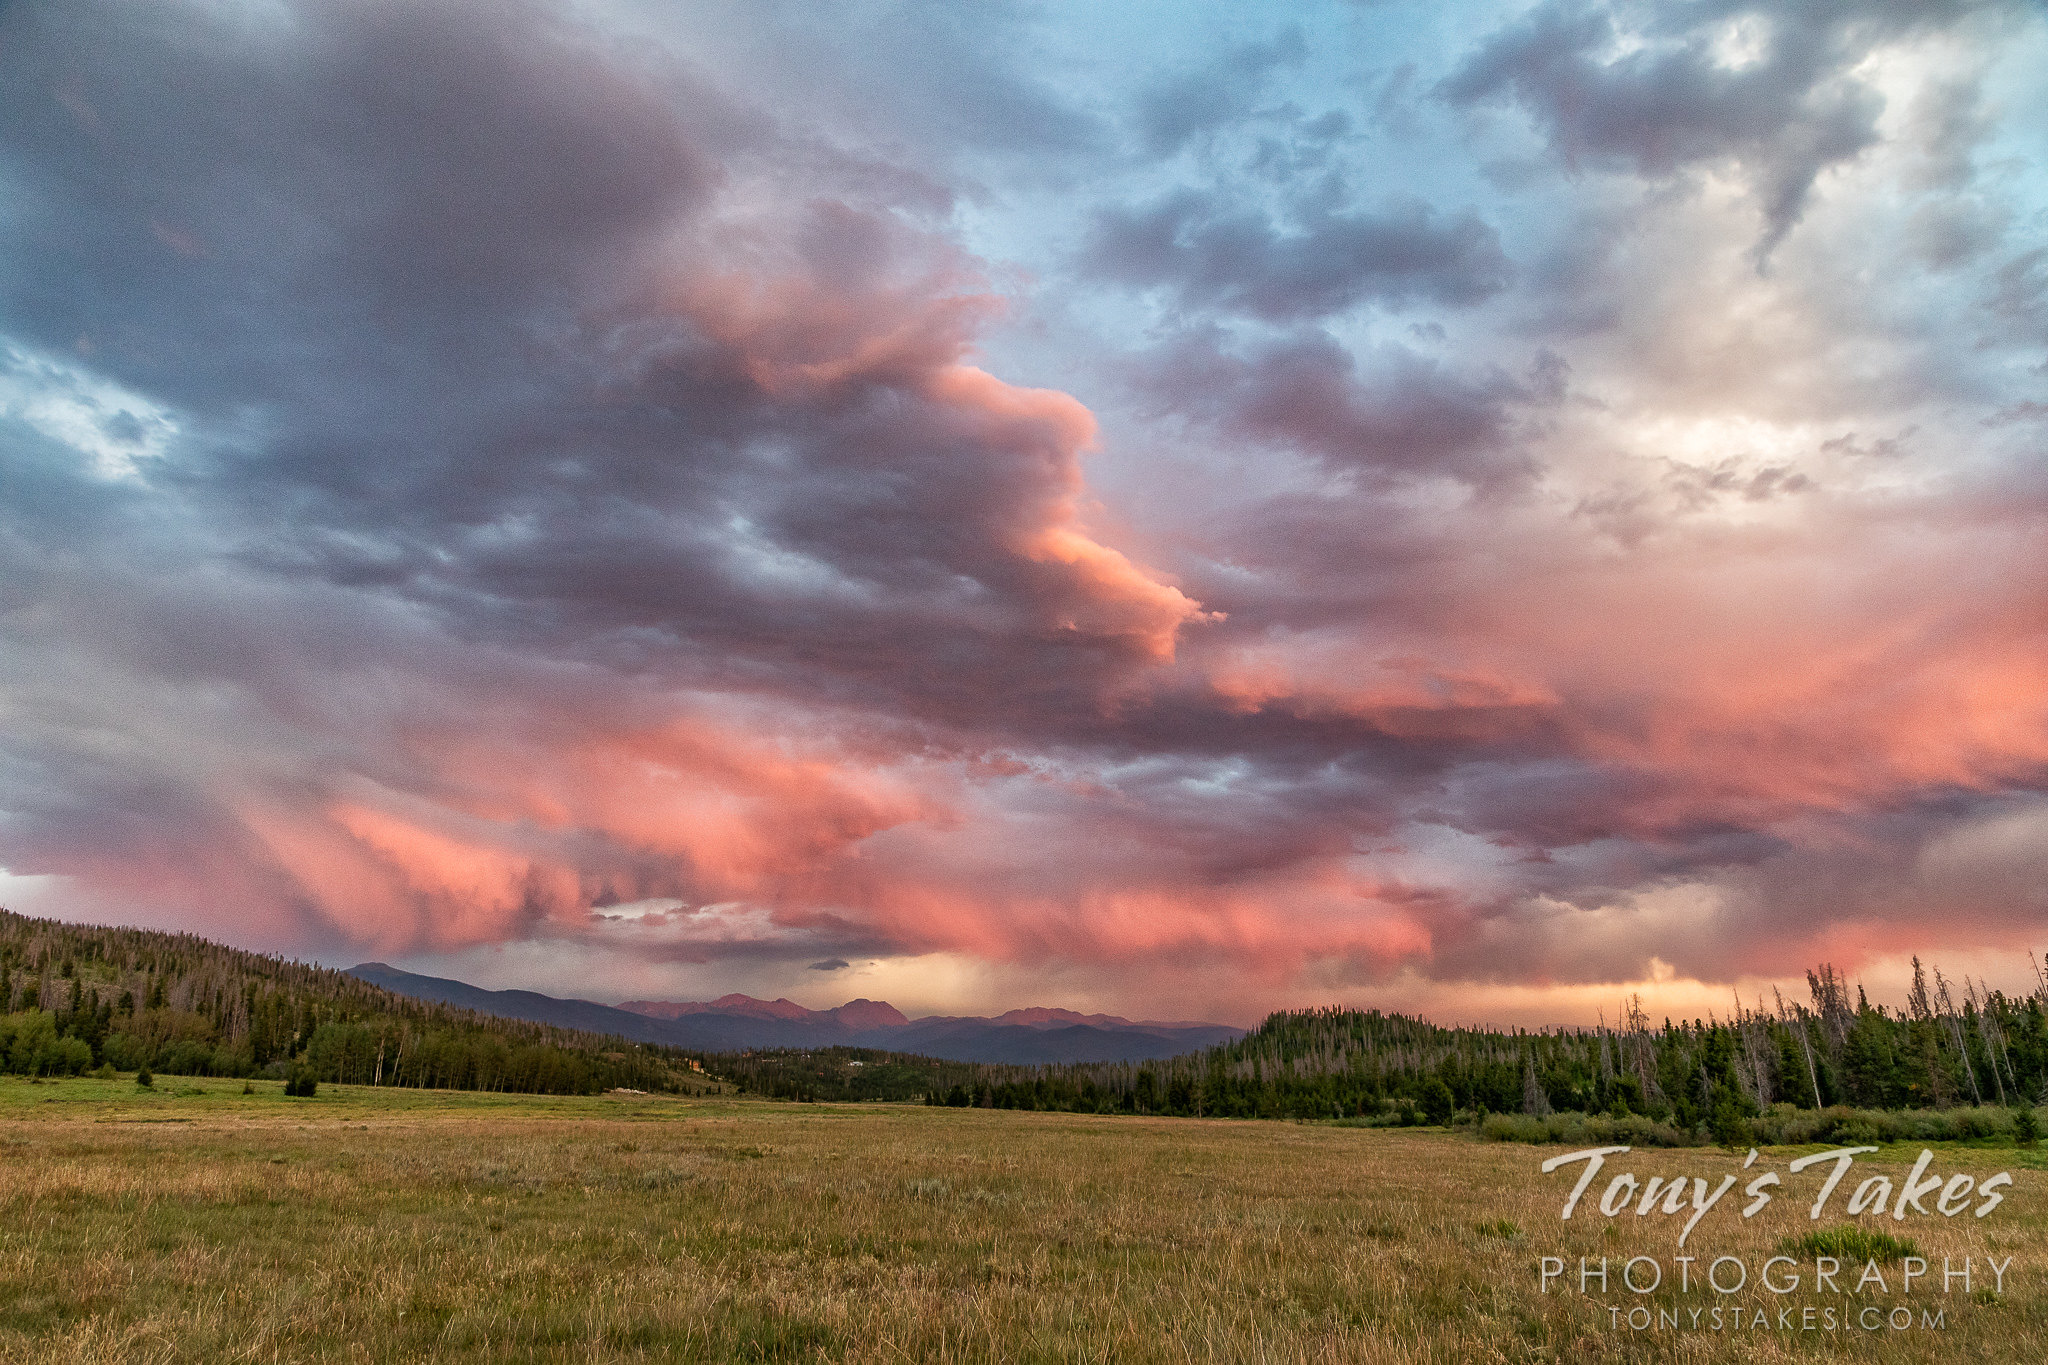 Sunset in the high country creates pastel colored scene